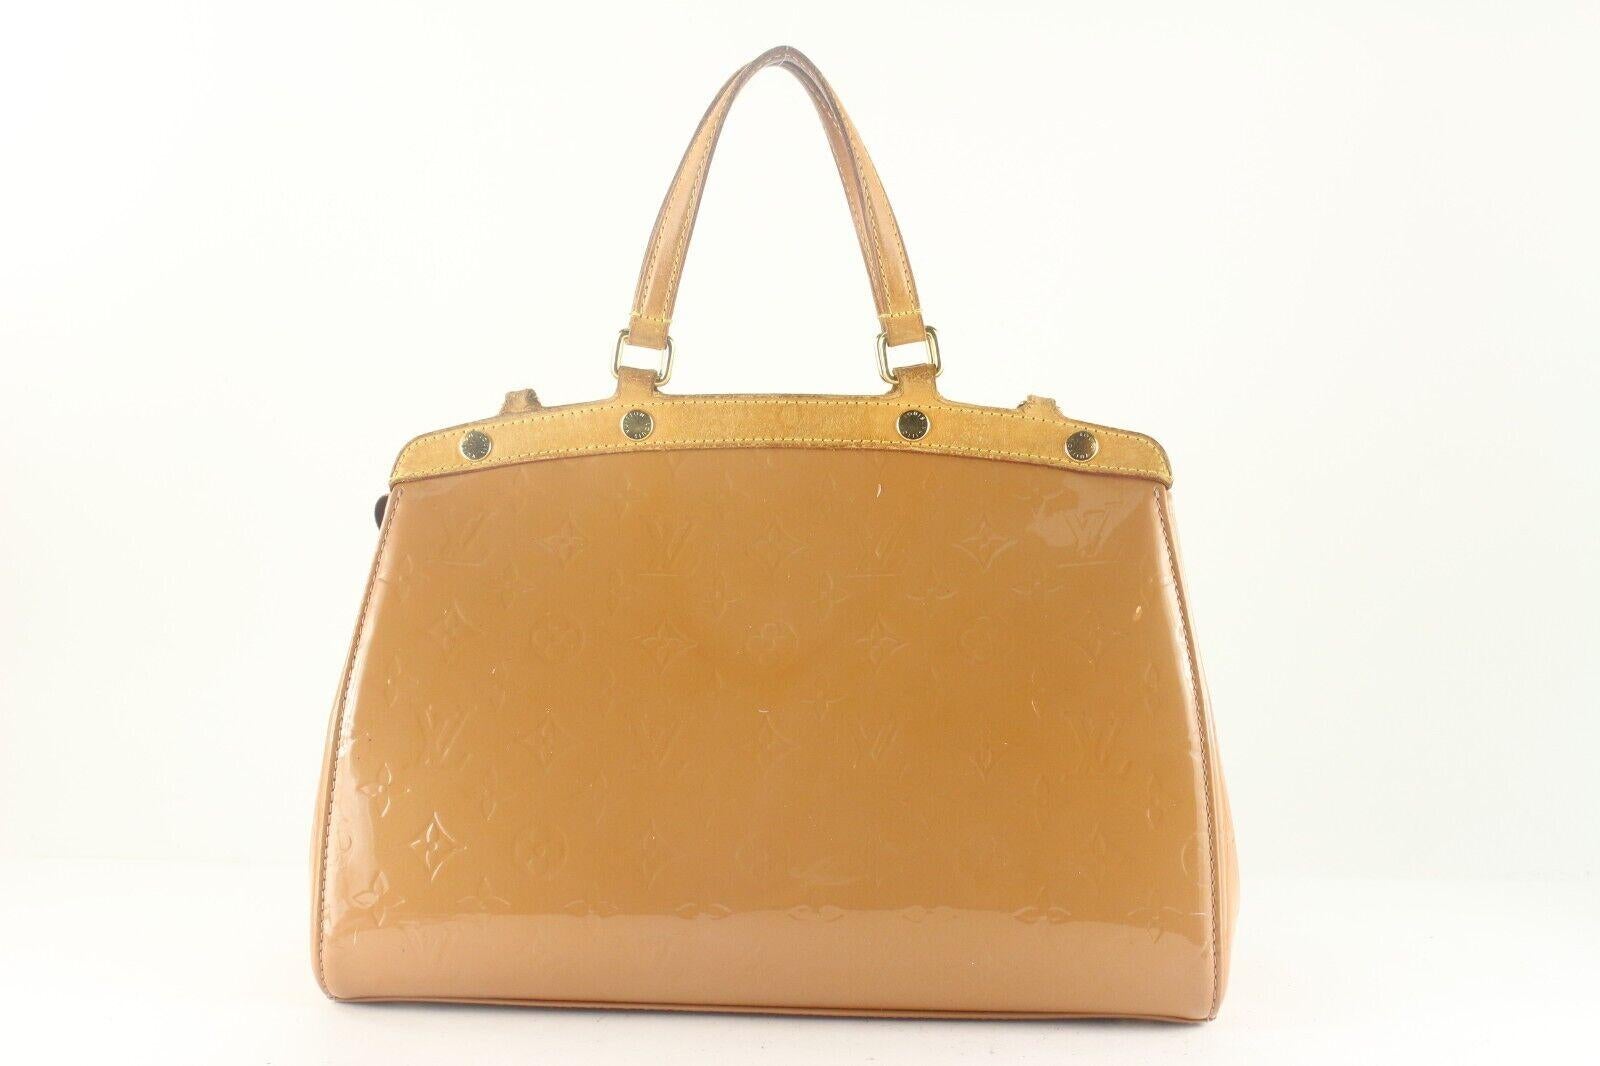 Louis Vuitton Nude Monogram Vernis Brea Tote 2way with Strap 9LK725K In Good Condition For Sale In Dix hills, NY